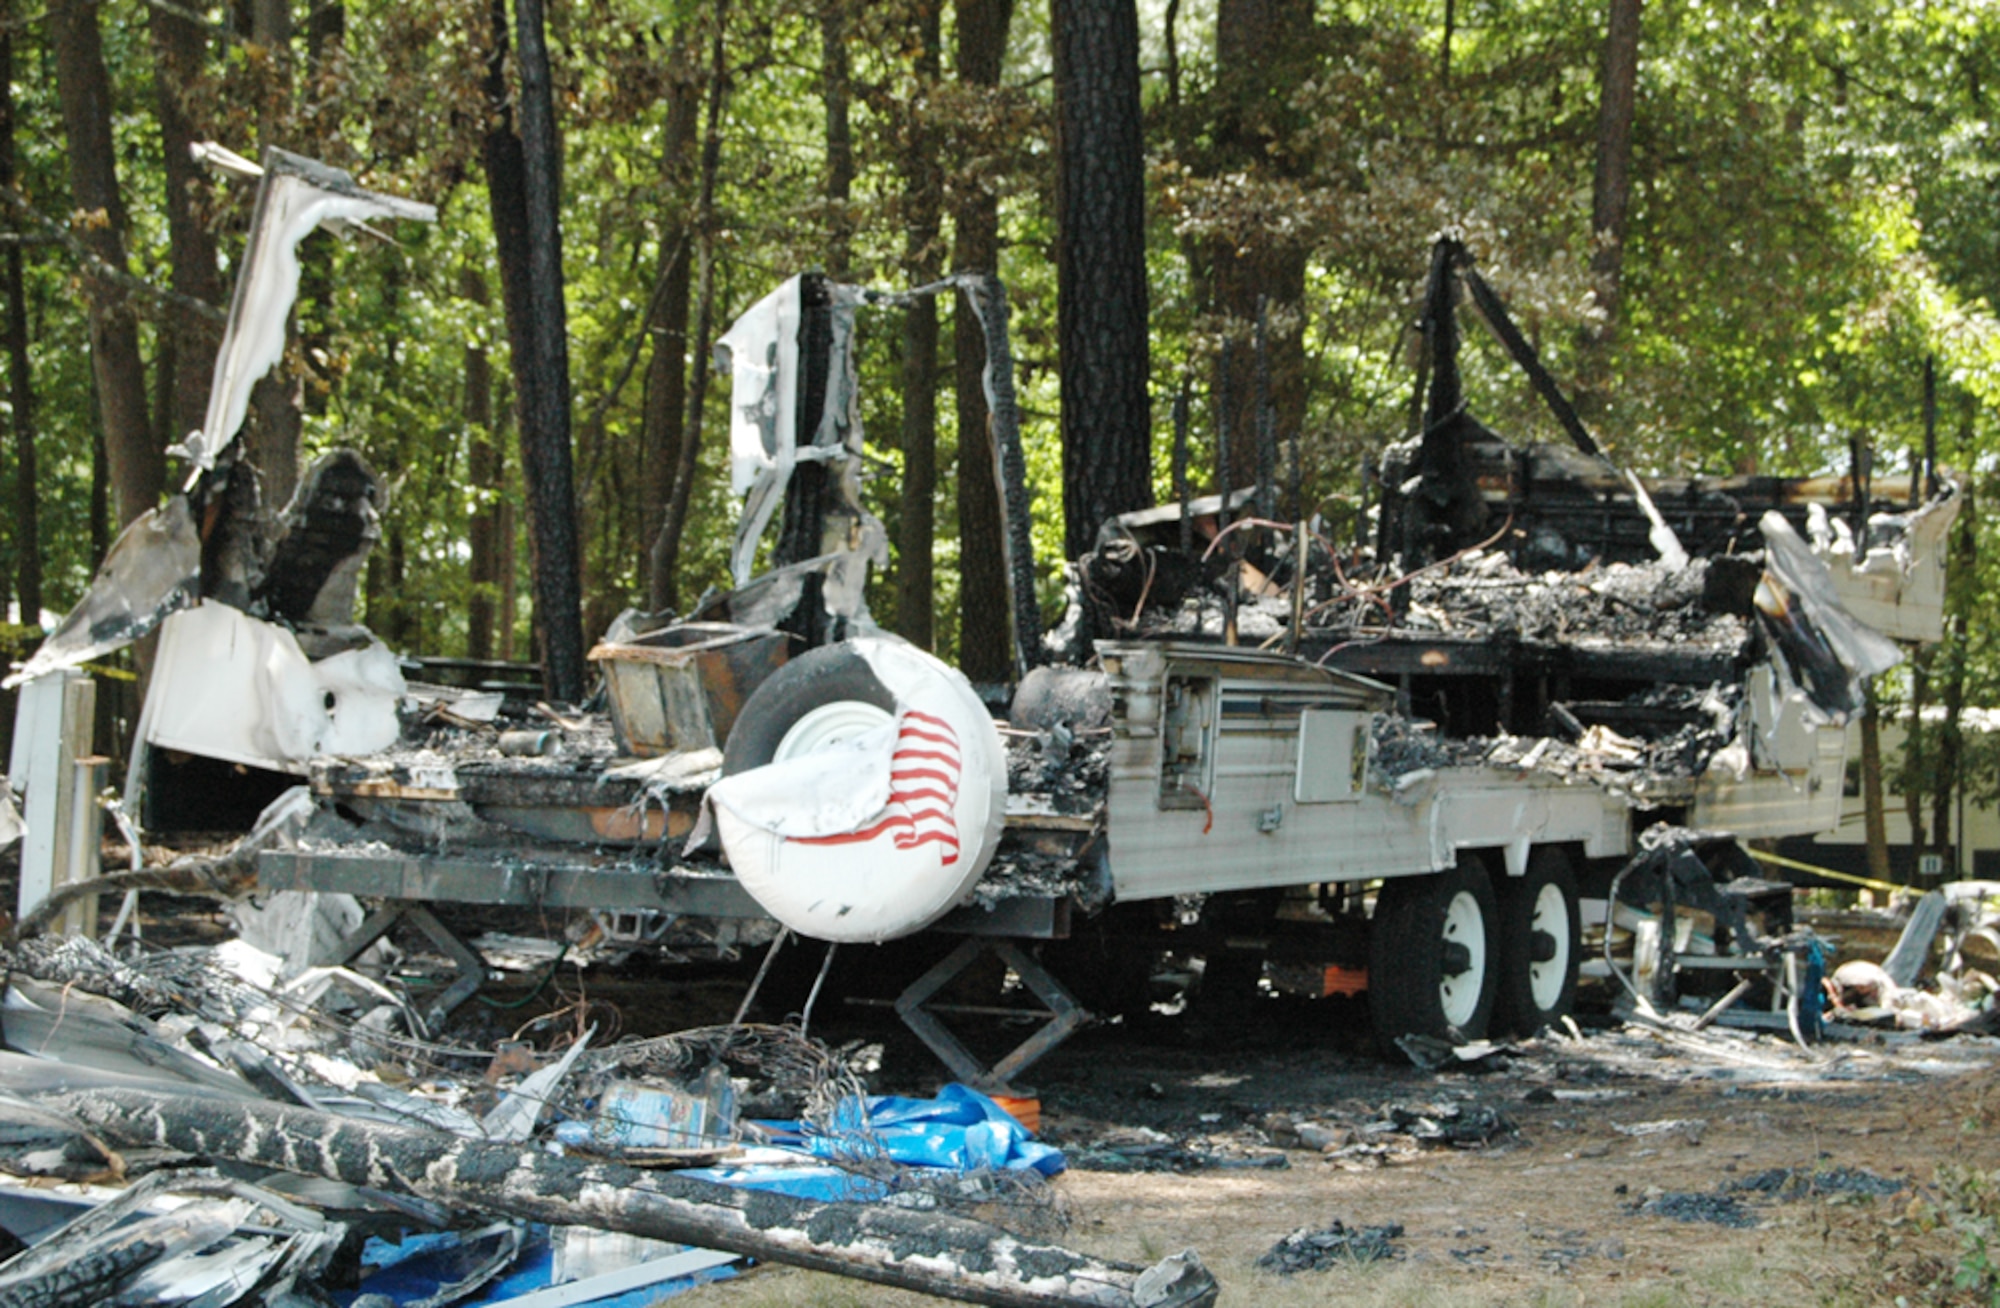 A profile of the recreational trailer that caught on fire around 2:30 a.m. July 17. Nearly a dozen firefighters extinguished the blaze, which caused $30,000 in damages. The cause is currently under investigation. (U.S. Air Force photo/Travon Dennis)